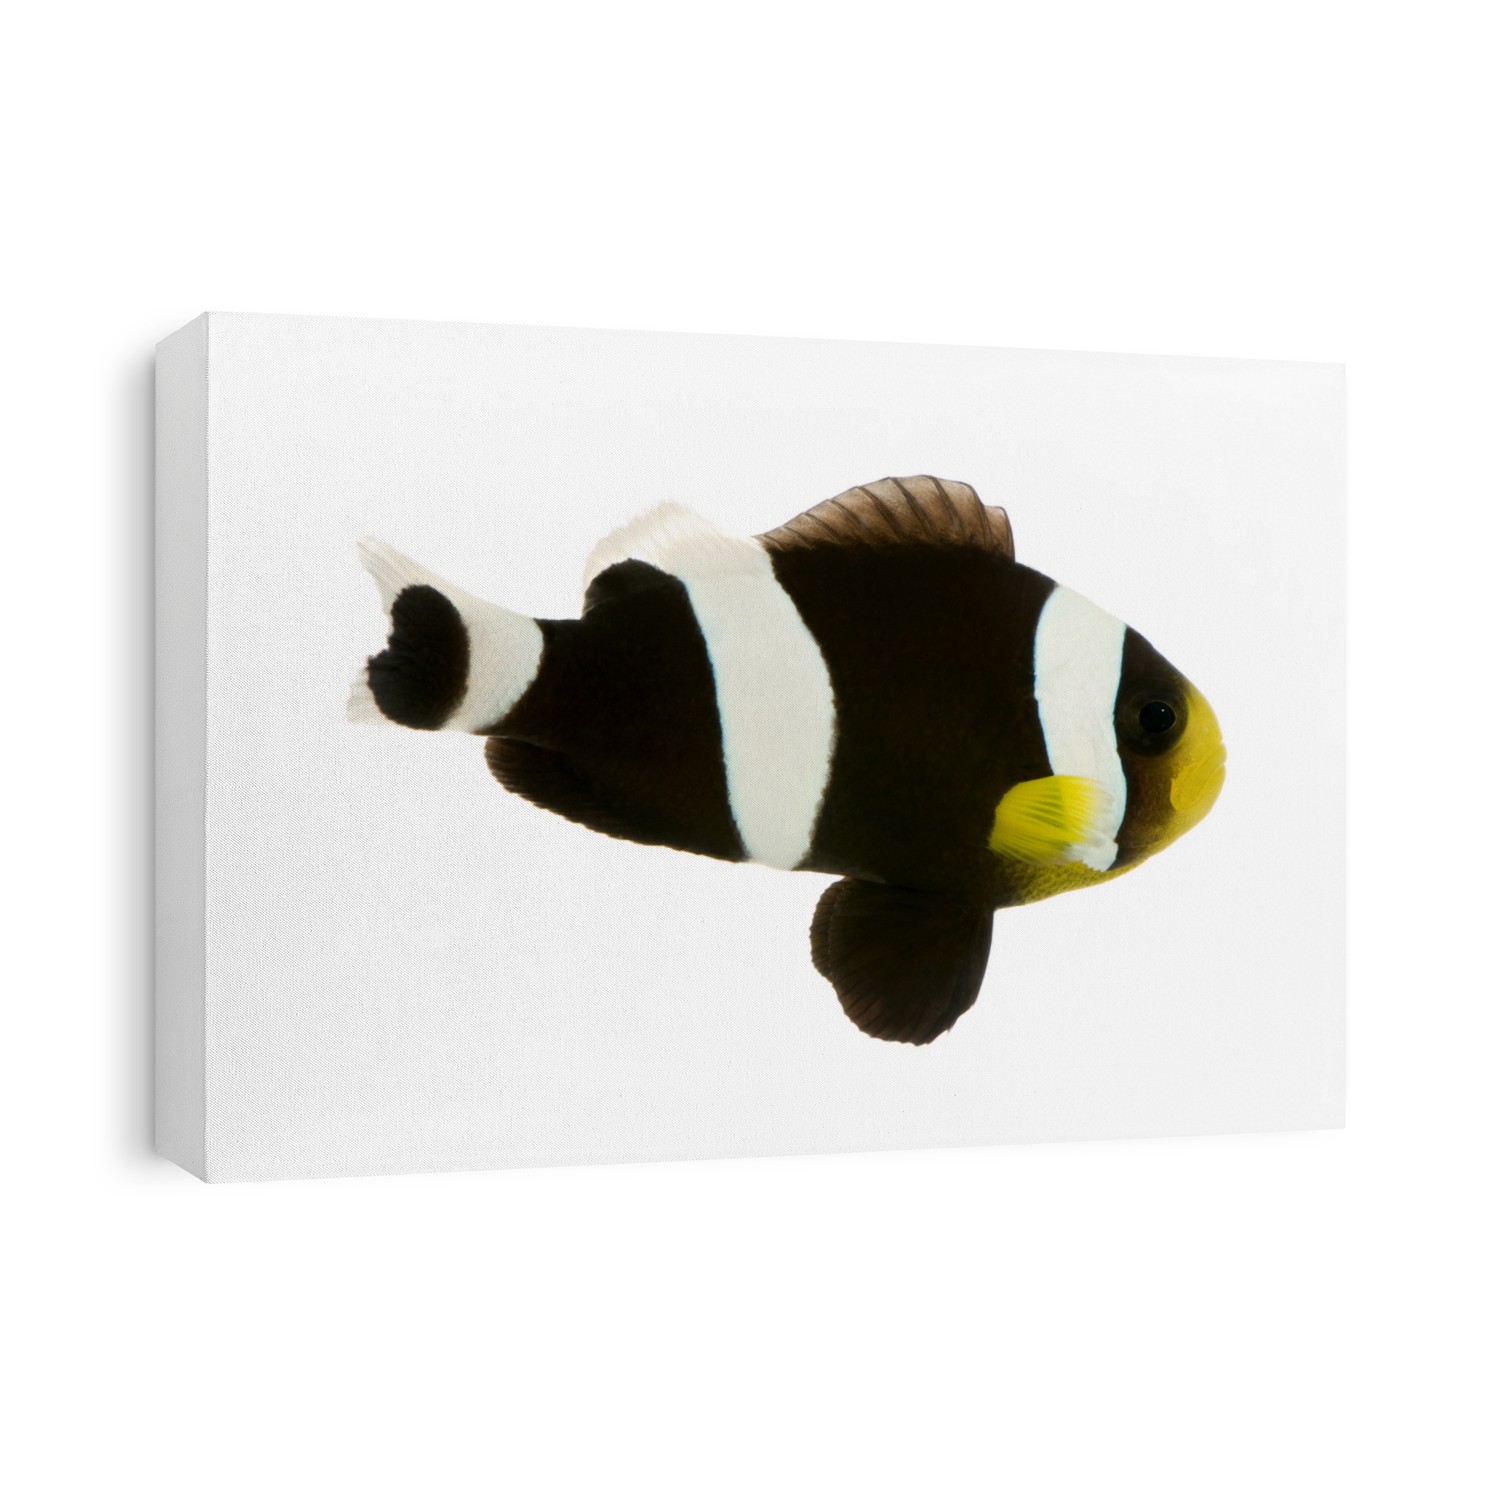 Saddleback Clownfish  - Amphiprion polymnus in front of a white background